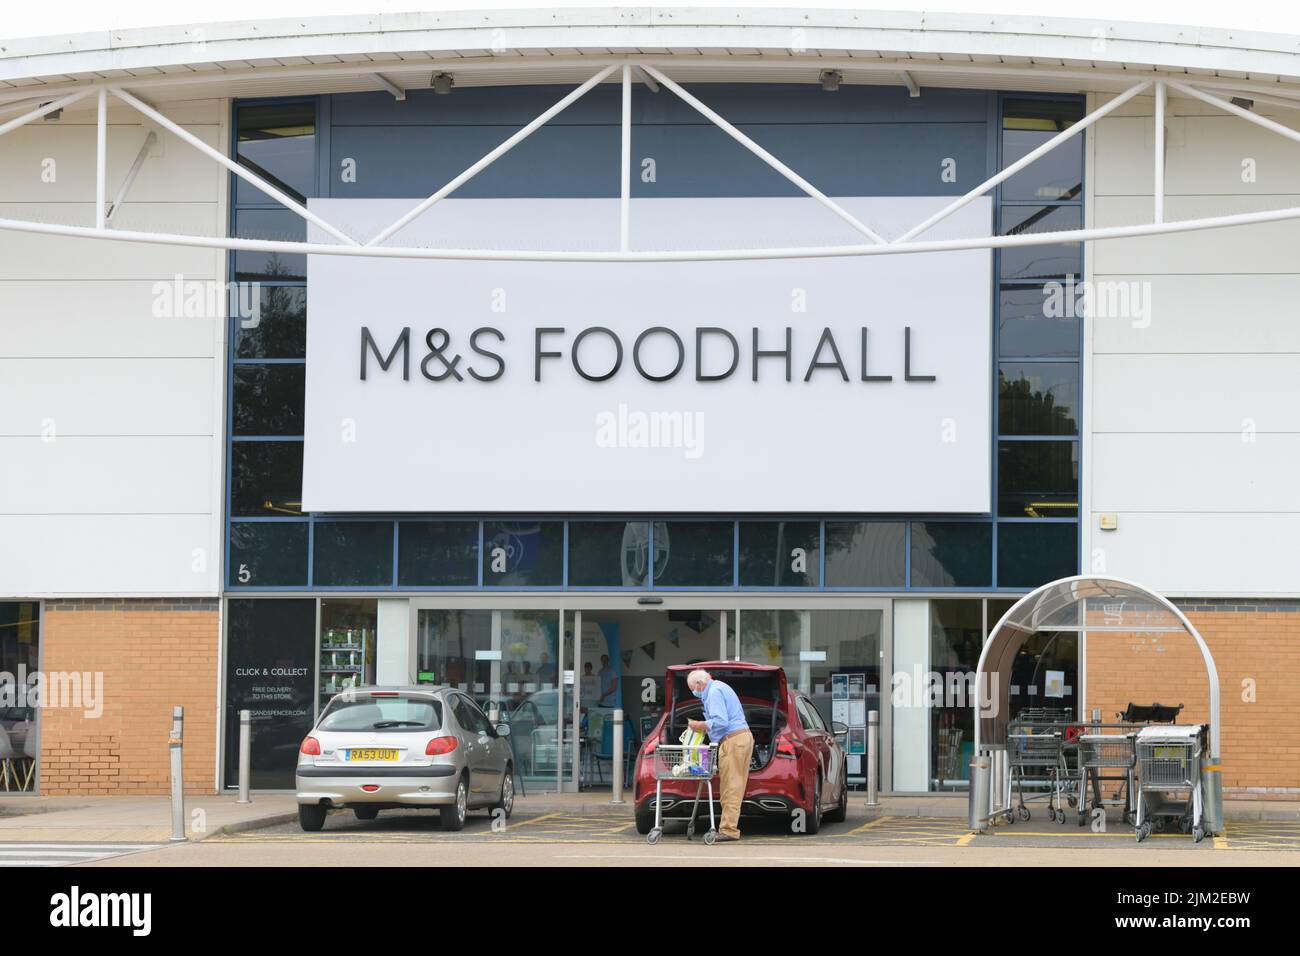 M&S Foodhall Canterbury Angleterre, Royaume-Uni Banque D'Images